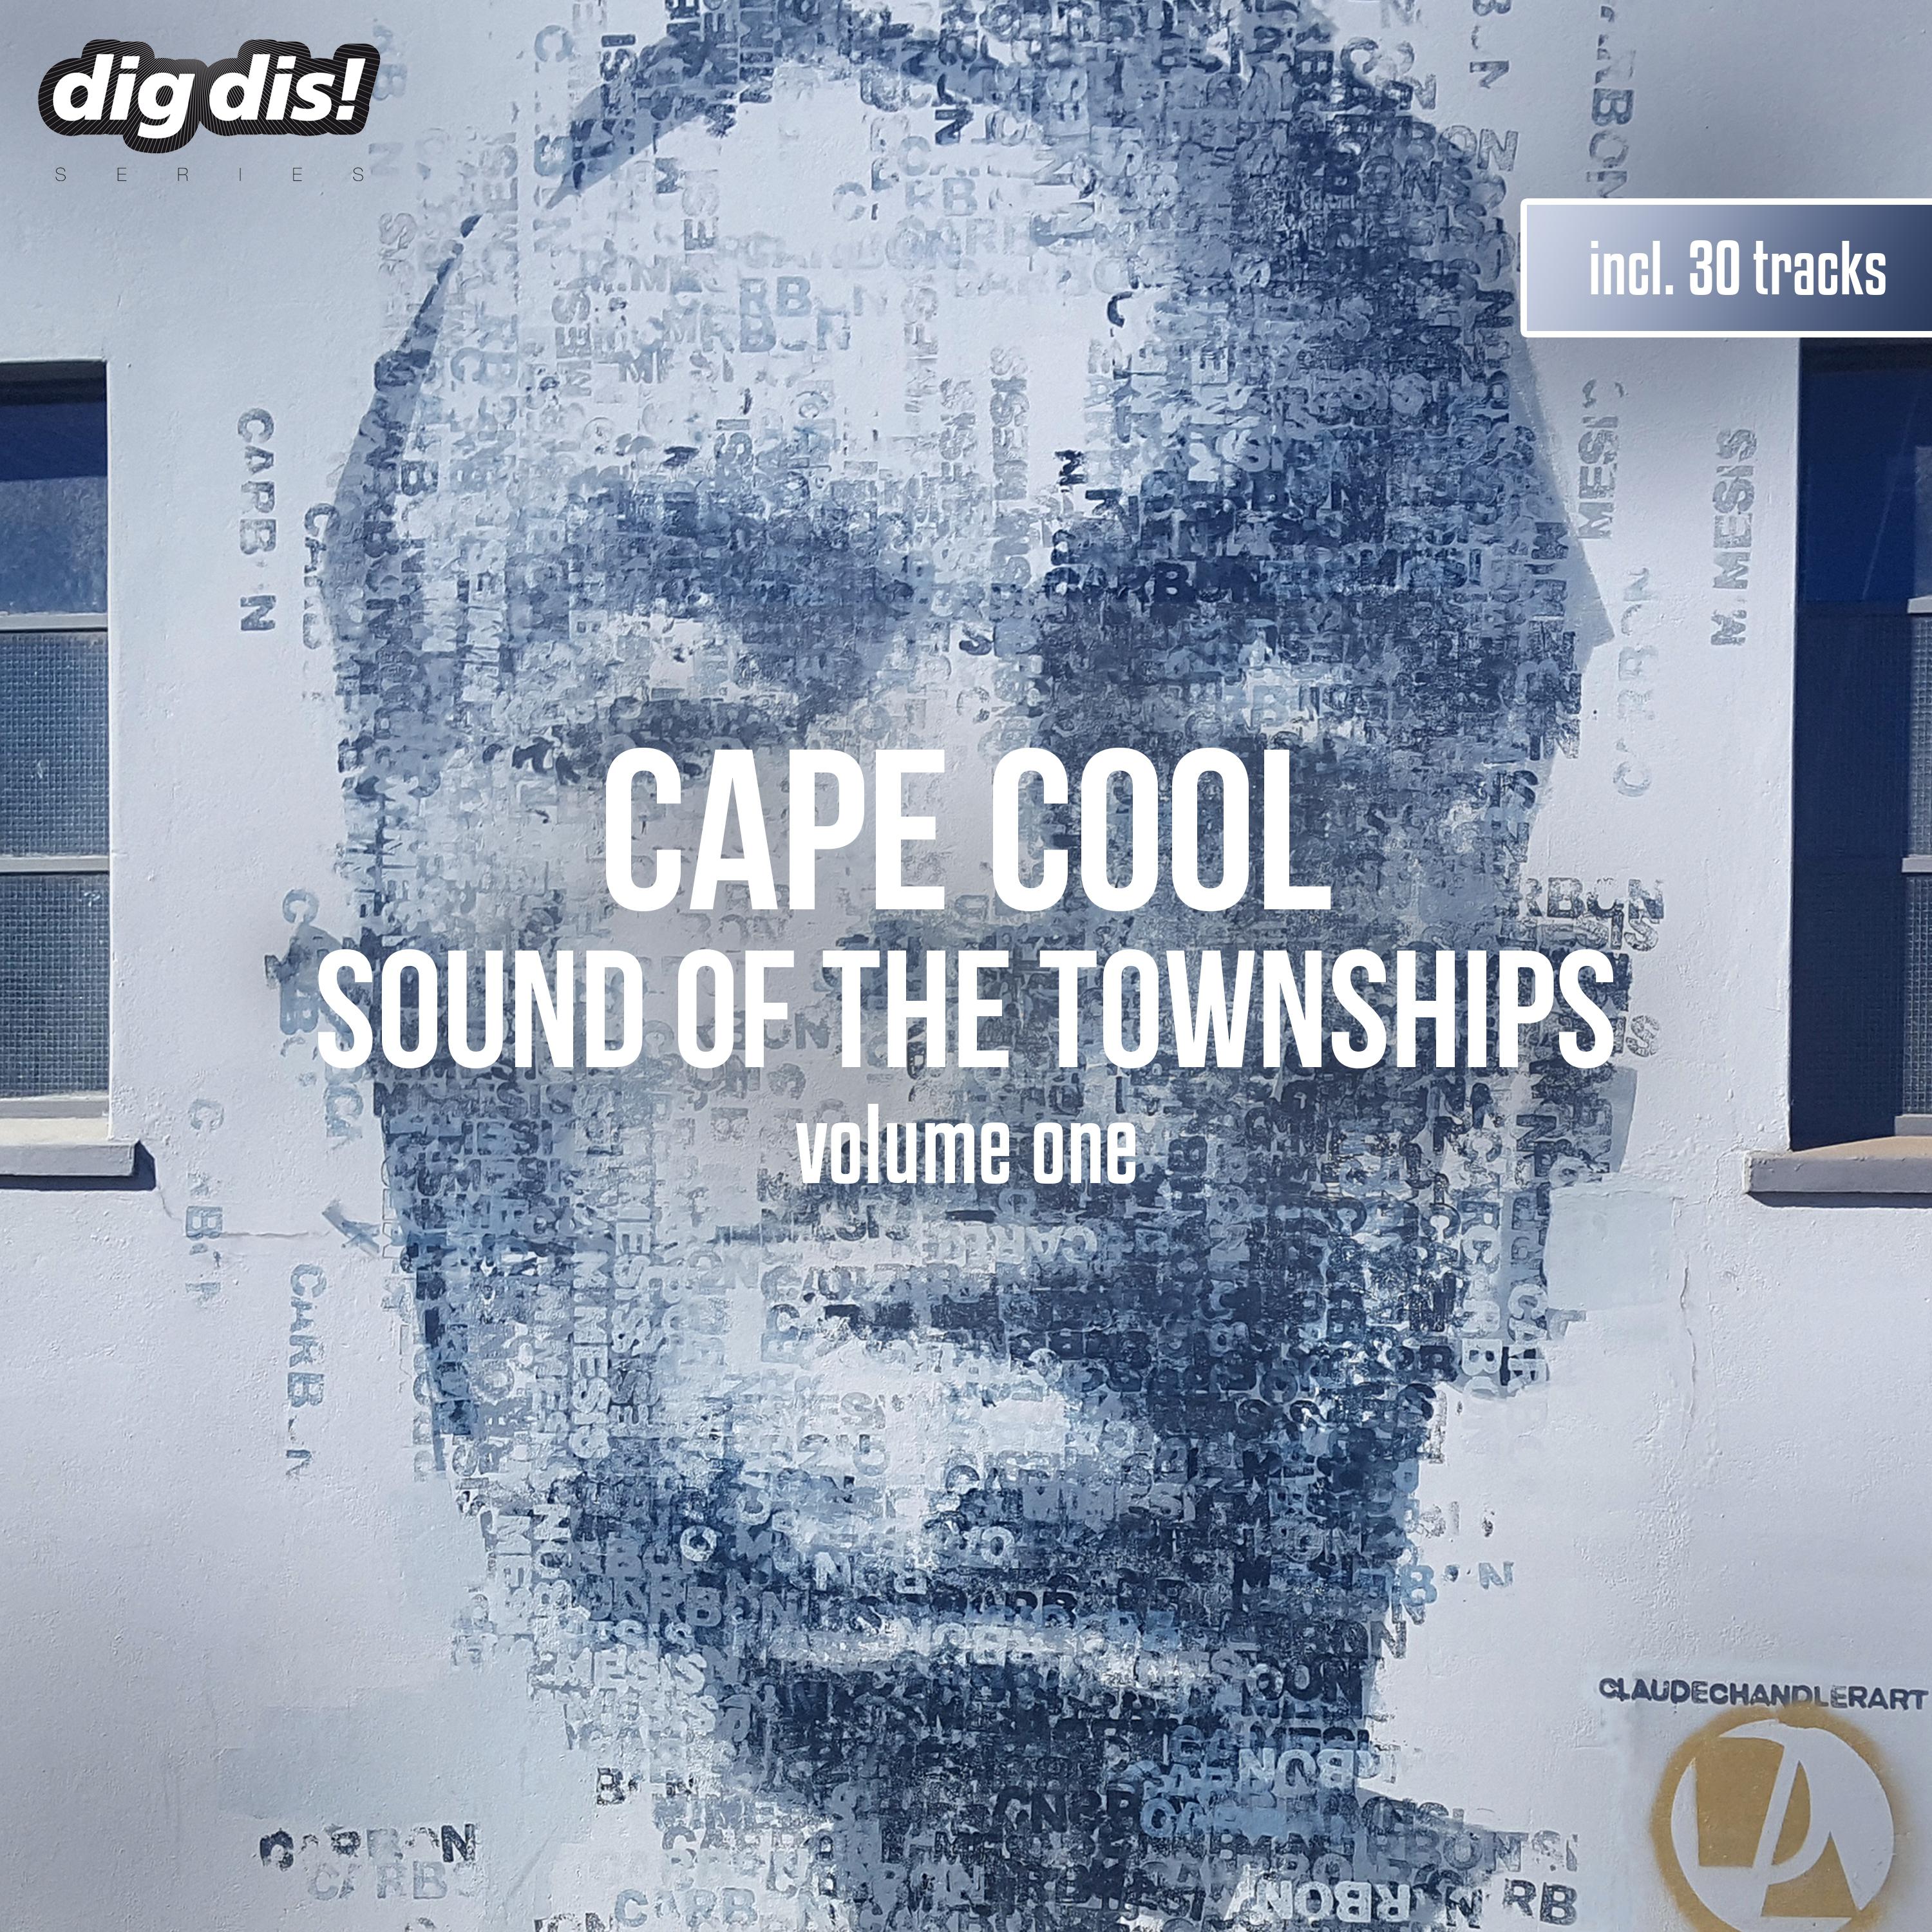 Cape Cool, Vol. 1 - Sound of the Townships